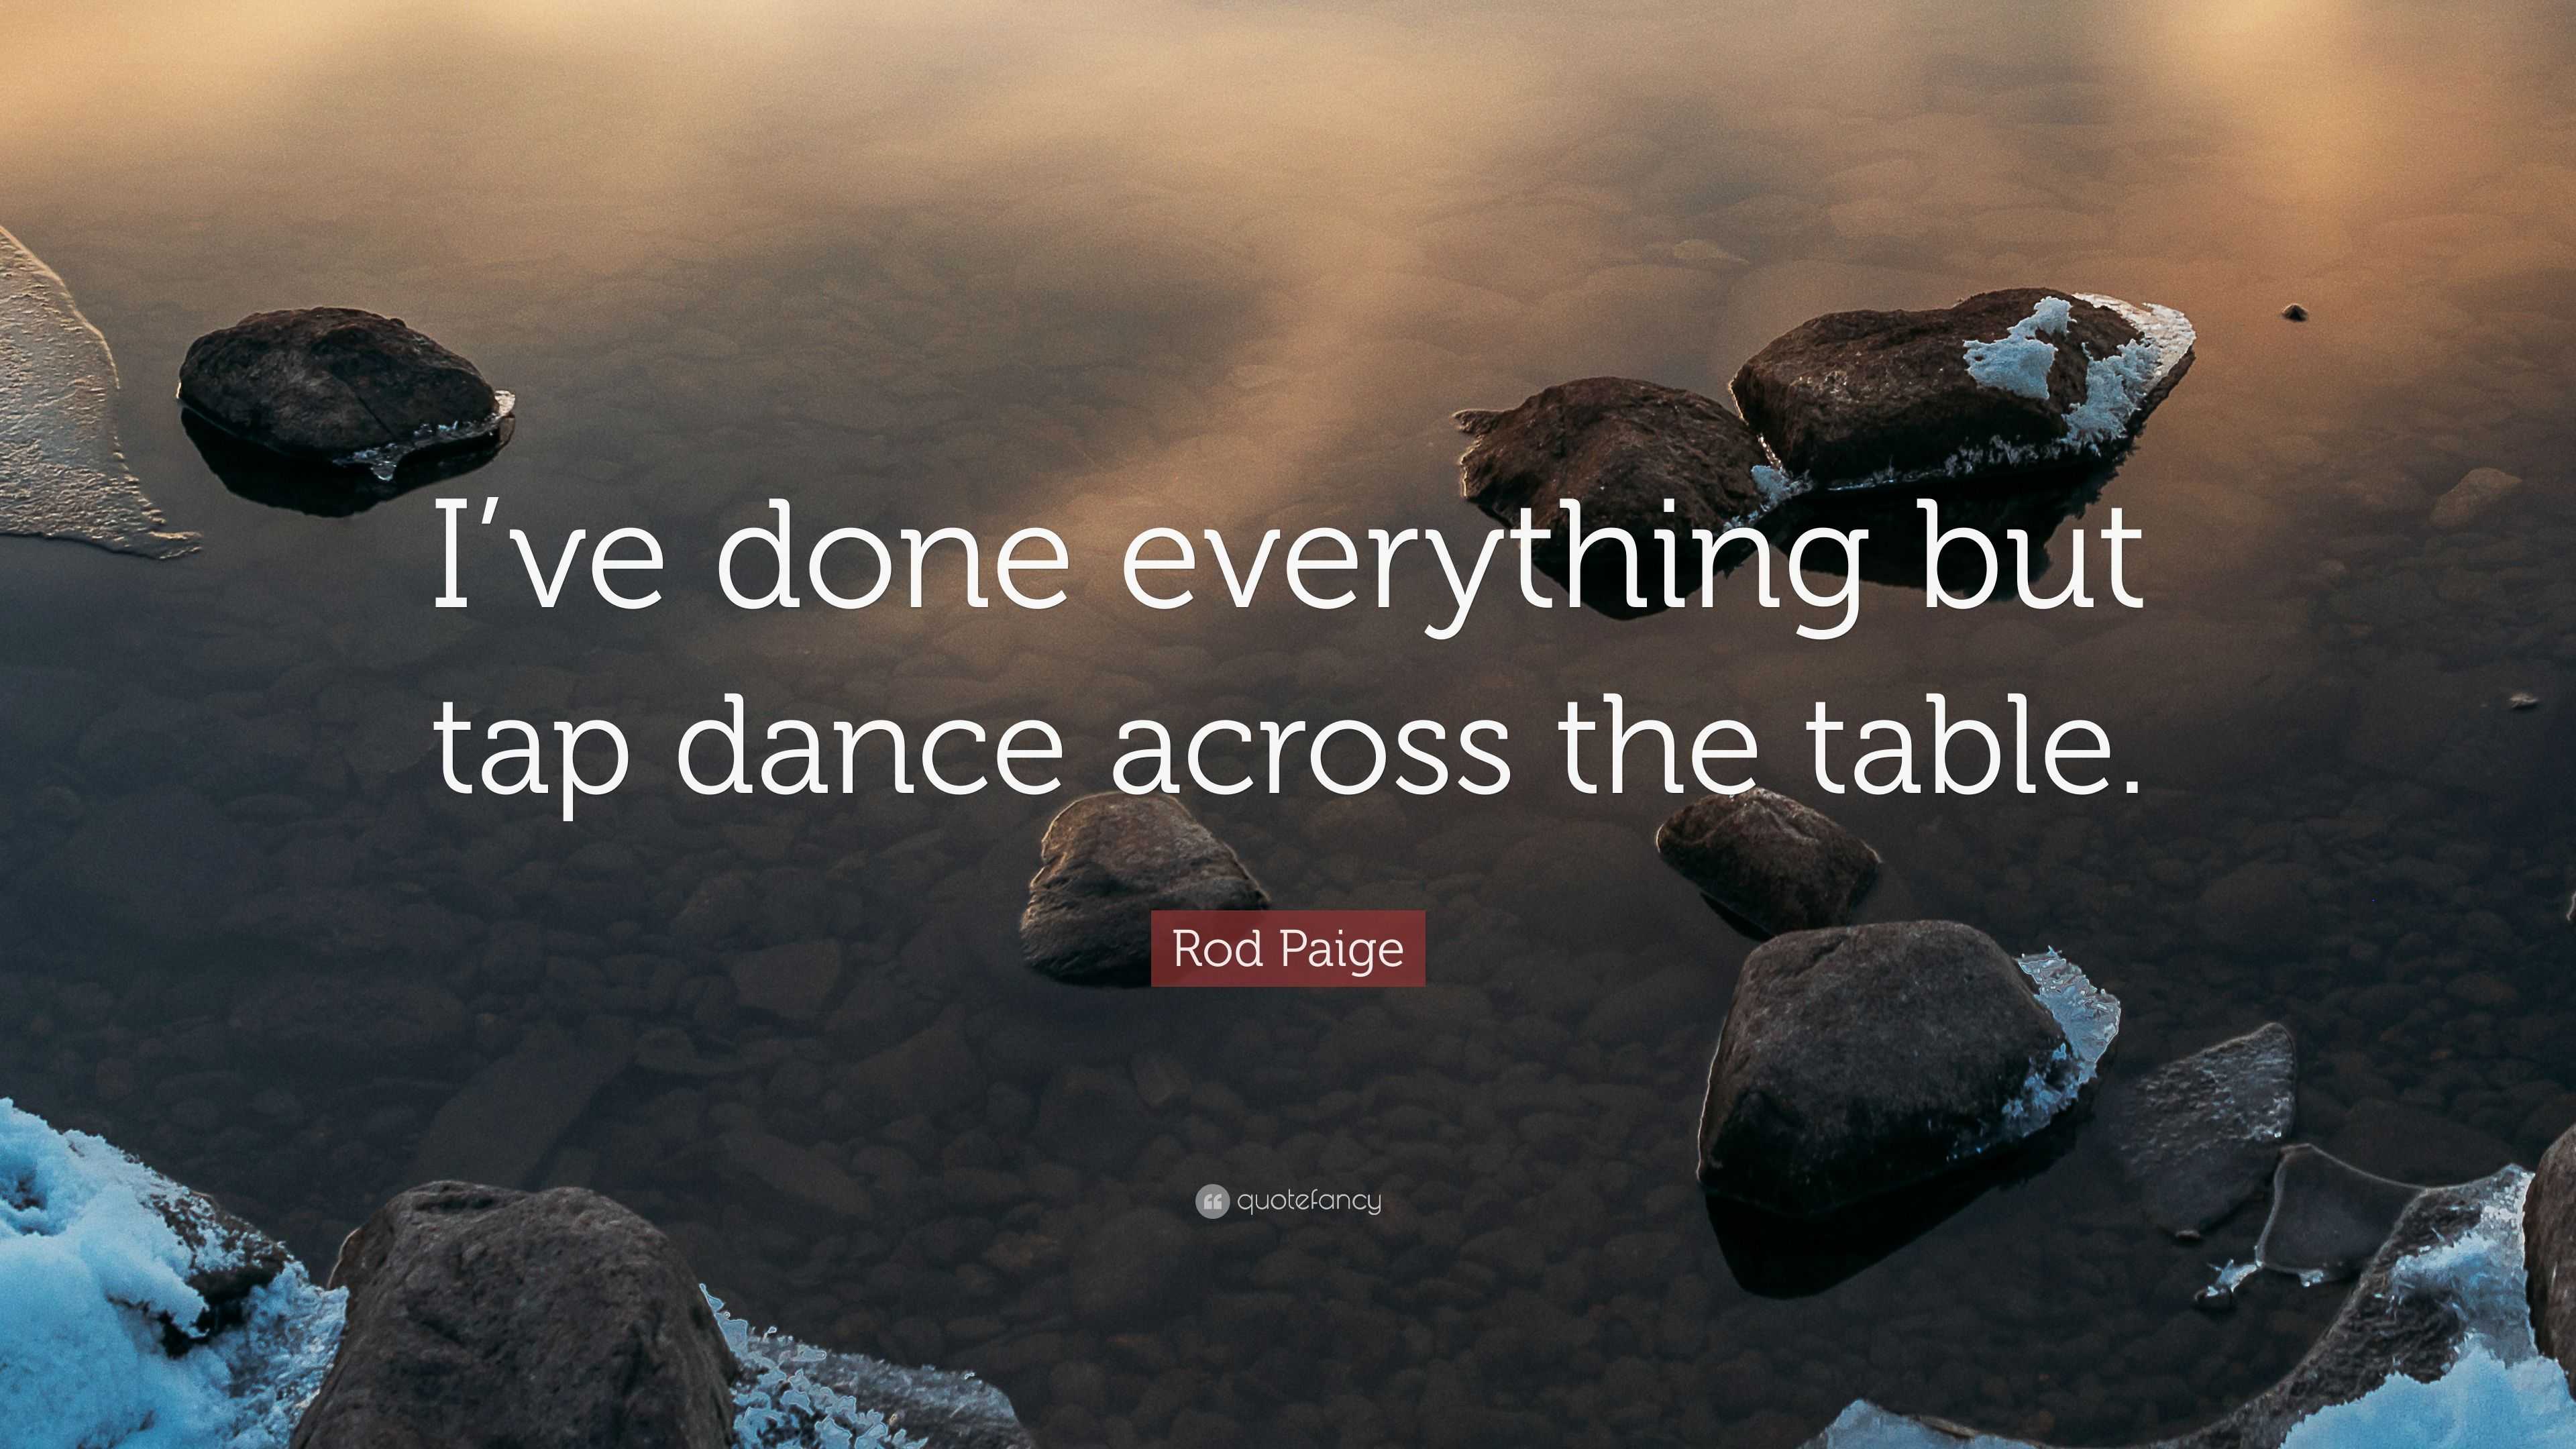 Rod Paige Quote: “I've done everything but tap dance across the table.”